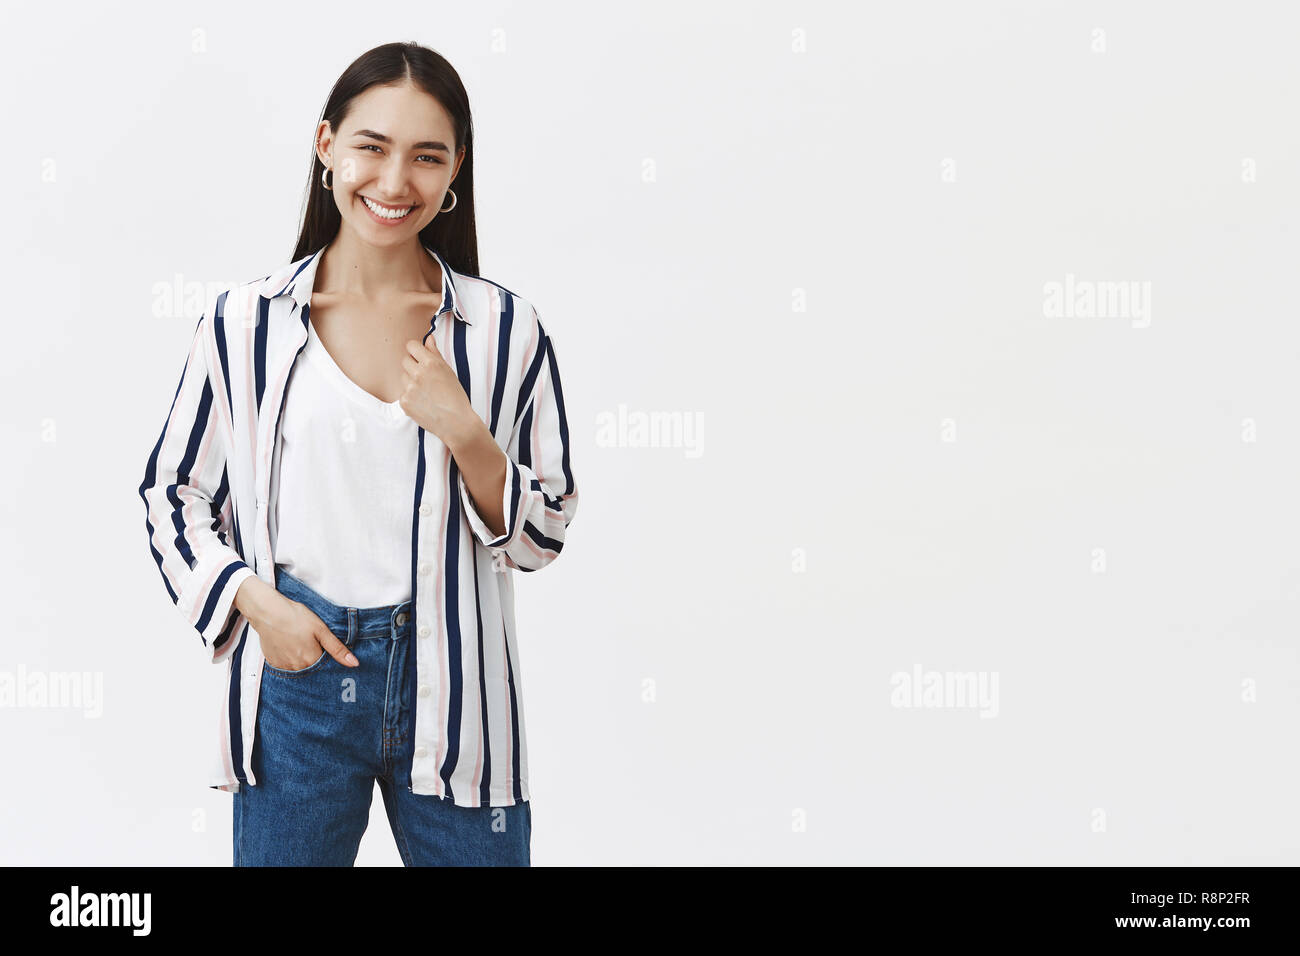 Indoor shot of happy sucessful young female entrepreneur in striped blouse and jeans, holding hand in pocket, smiling joyfully, being pleased after opening own business over gray background Stock Photo